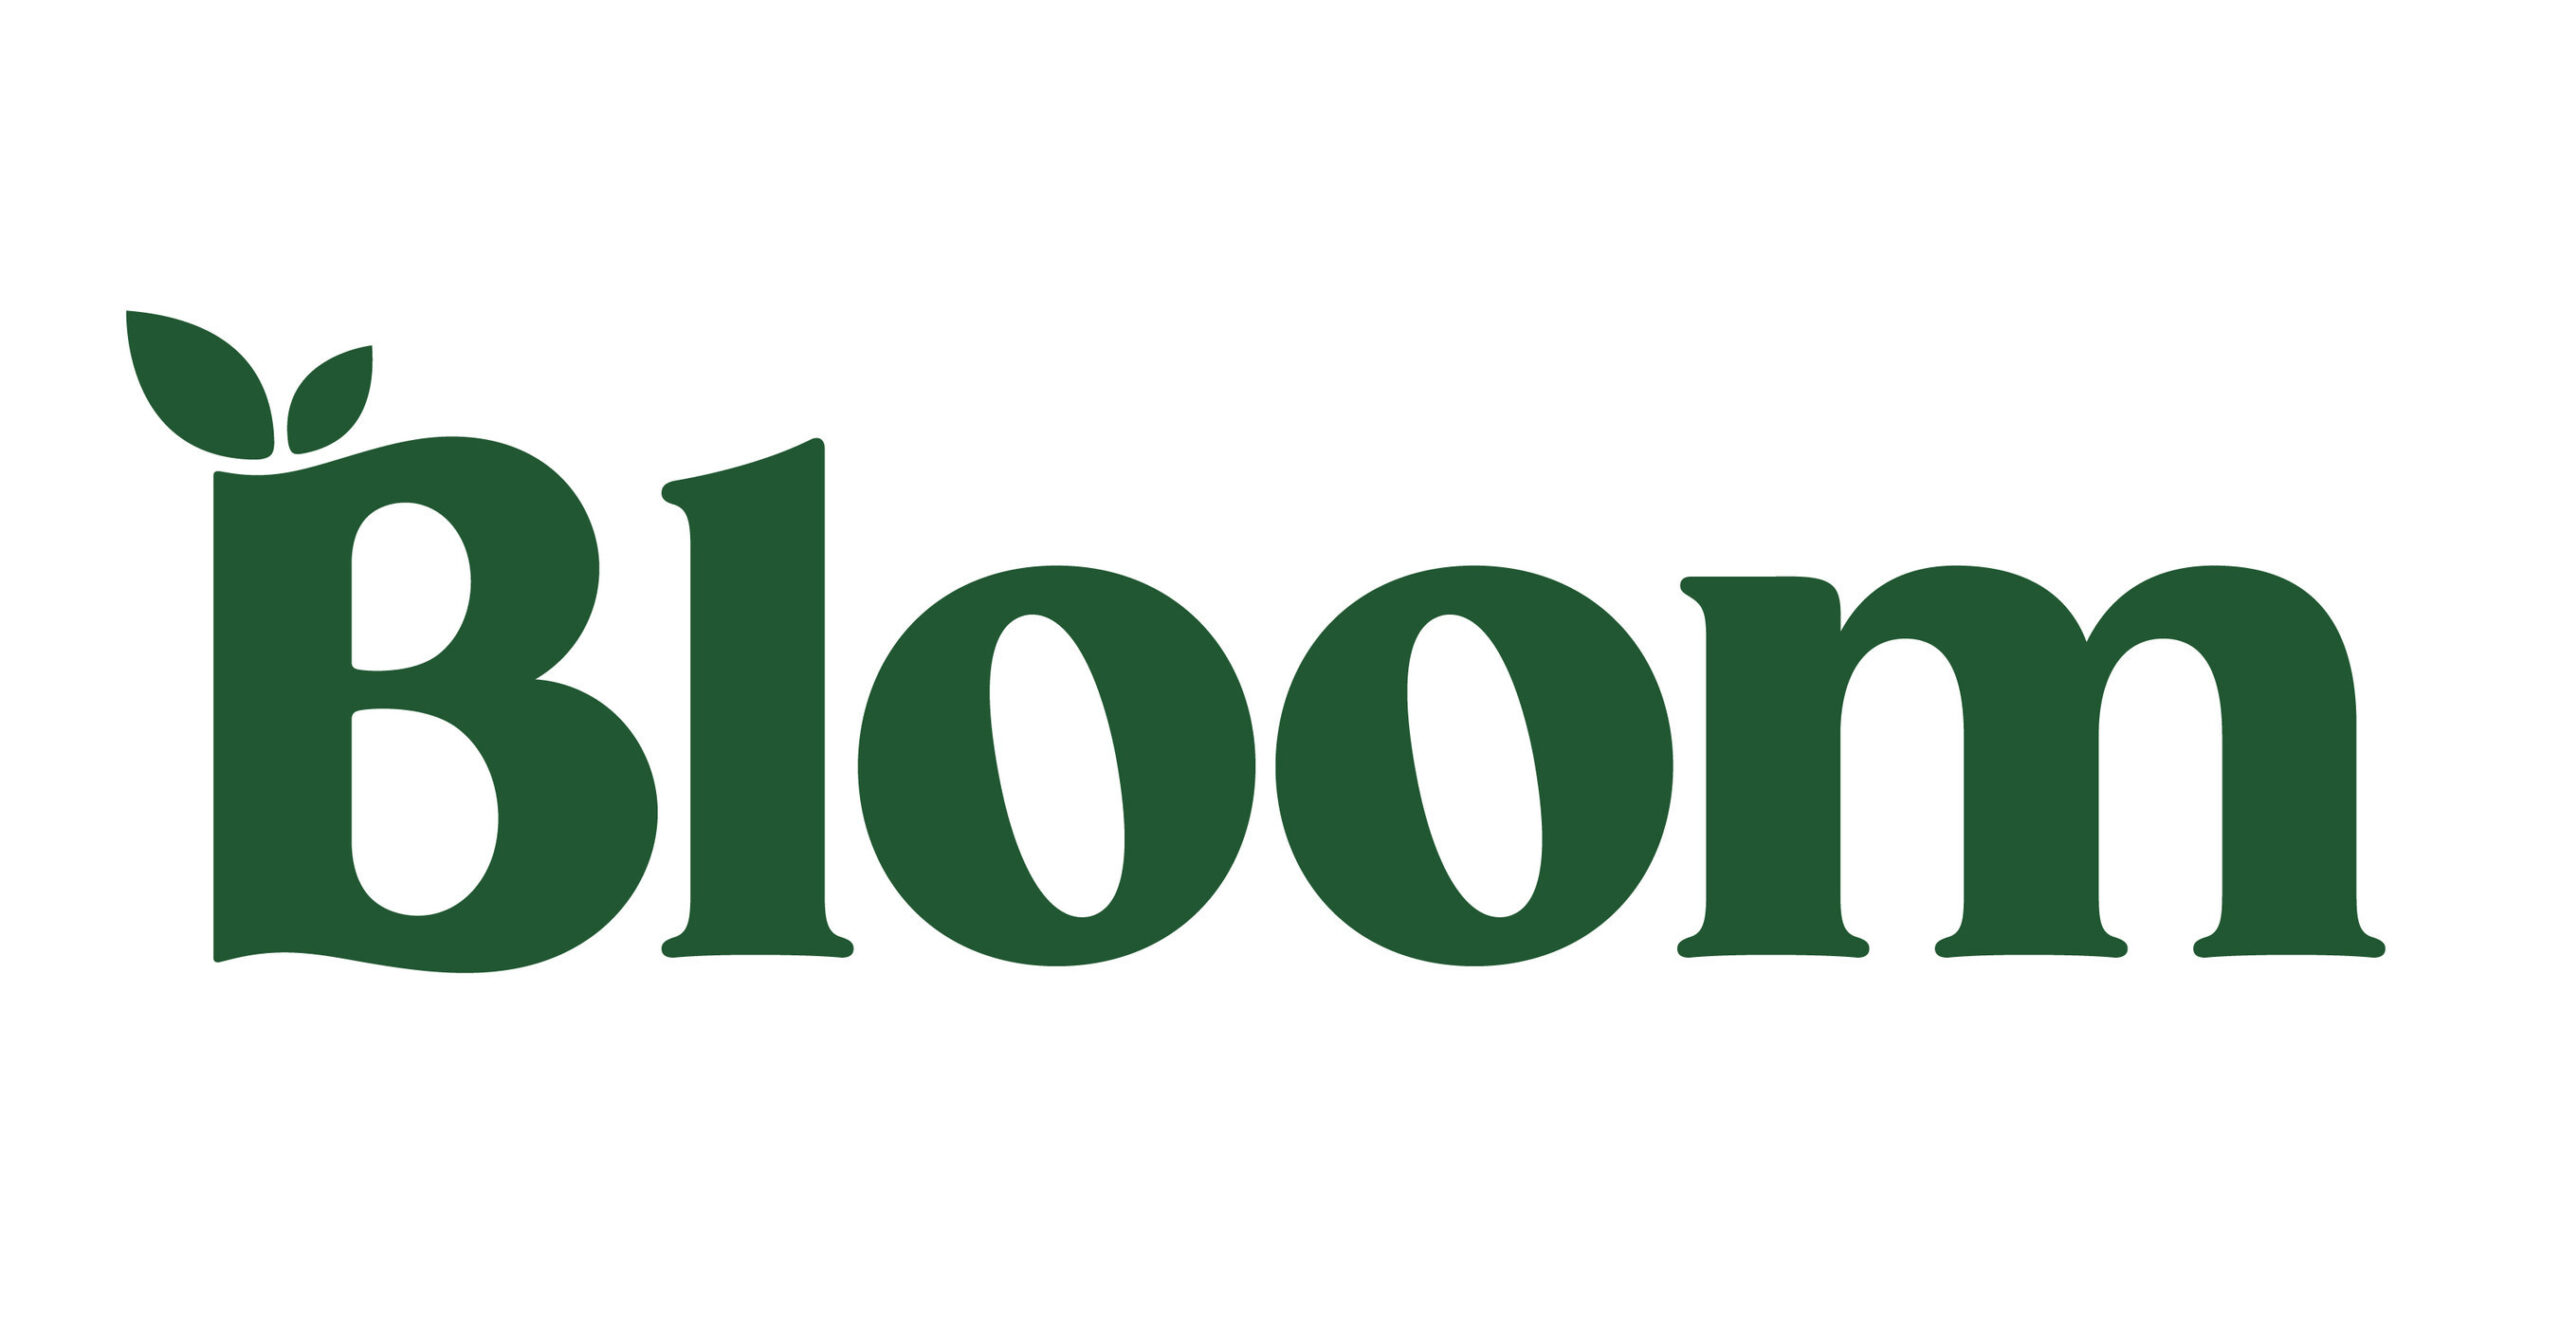 Bloom Nutrition Enters Snacking Category with New Limited-Edition Protein Bars